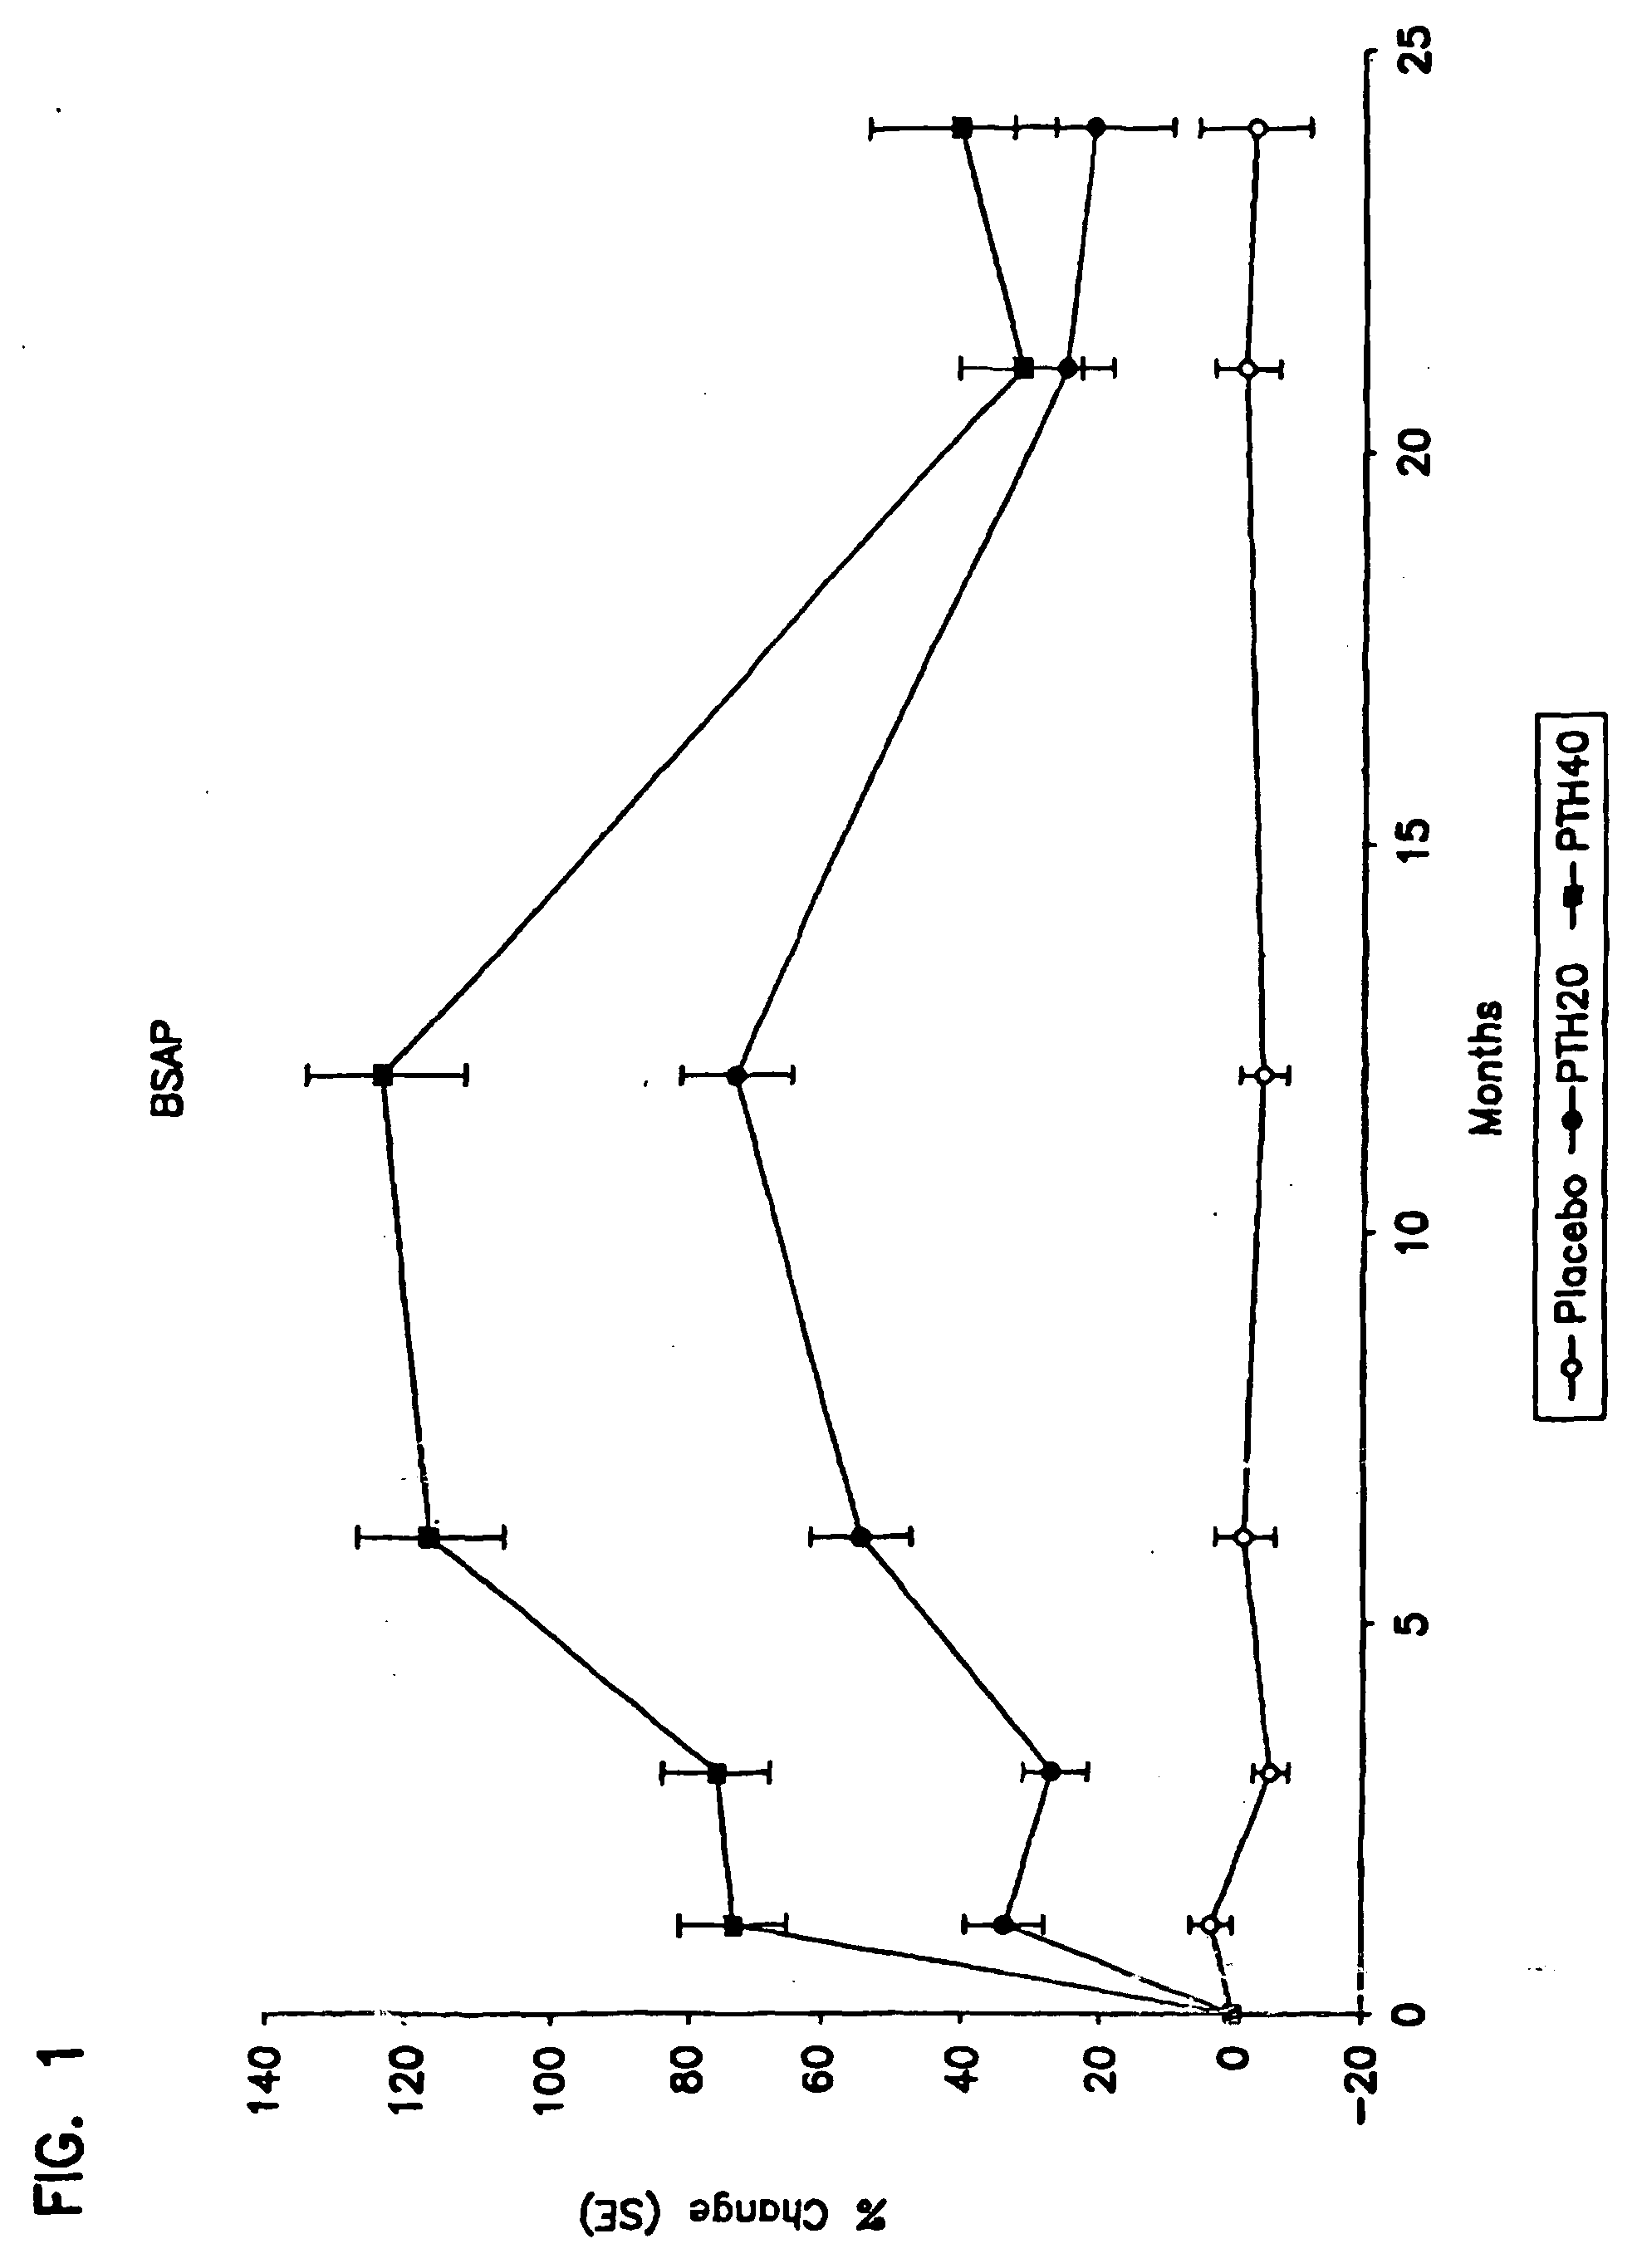 Method for monitoring treatment with a parathyroid hormone